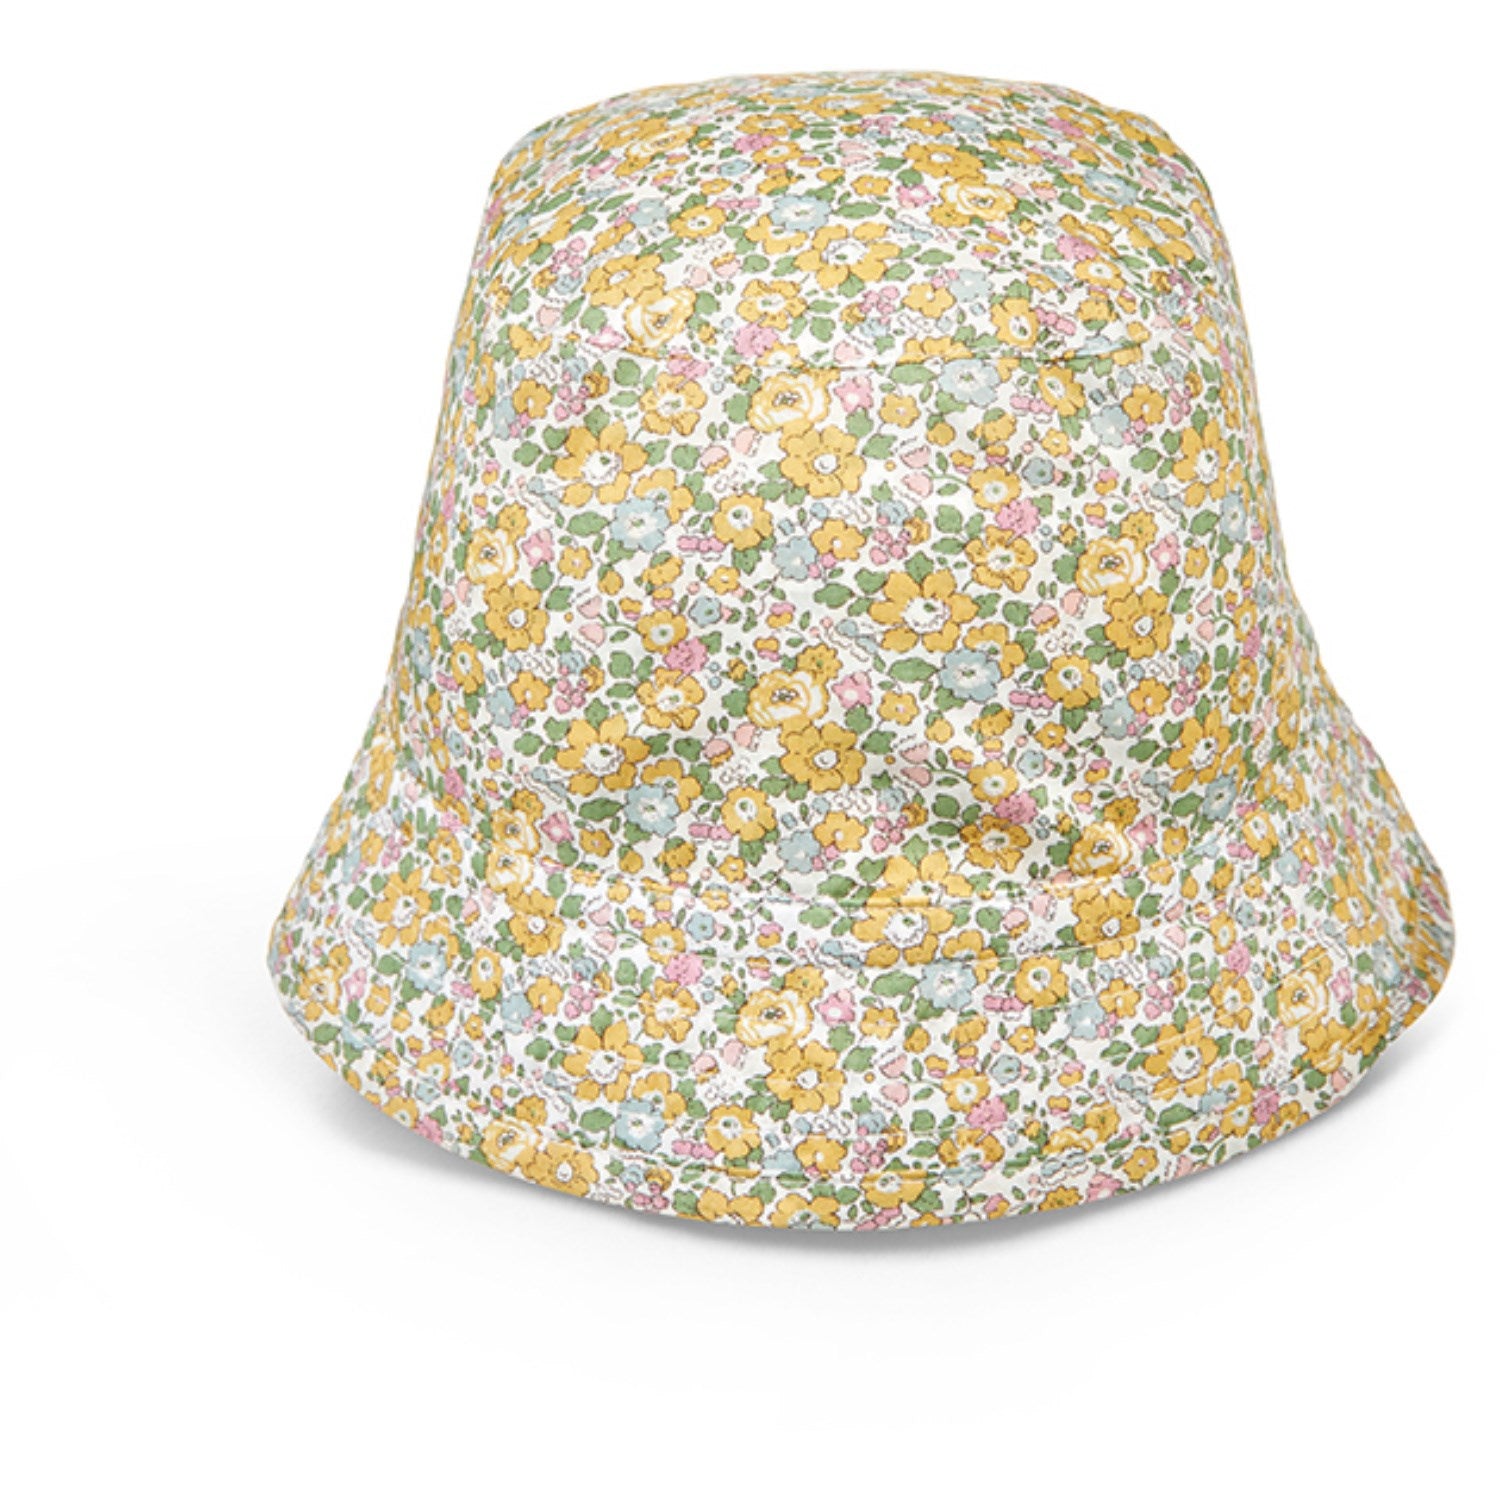 Lalaby Betsy Ann Loui Hat - Betsy Ann